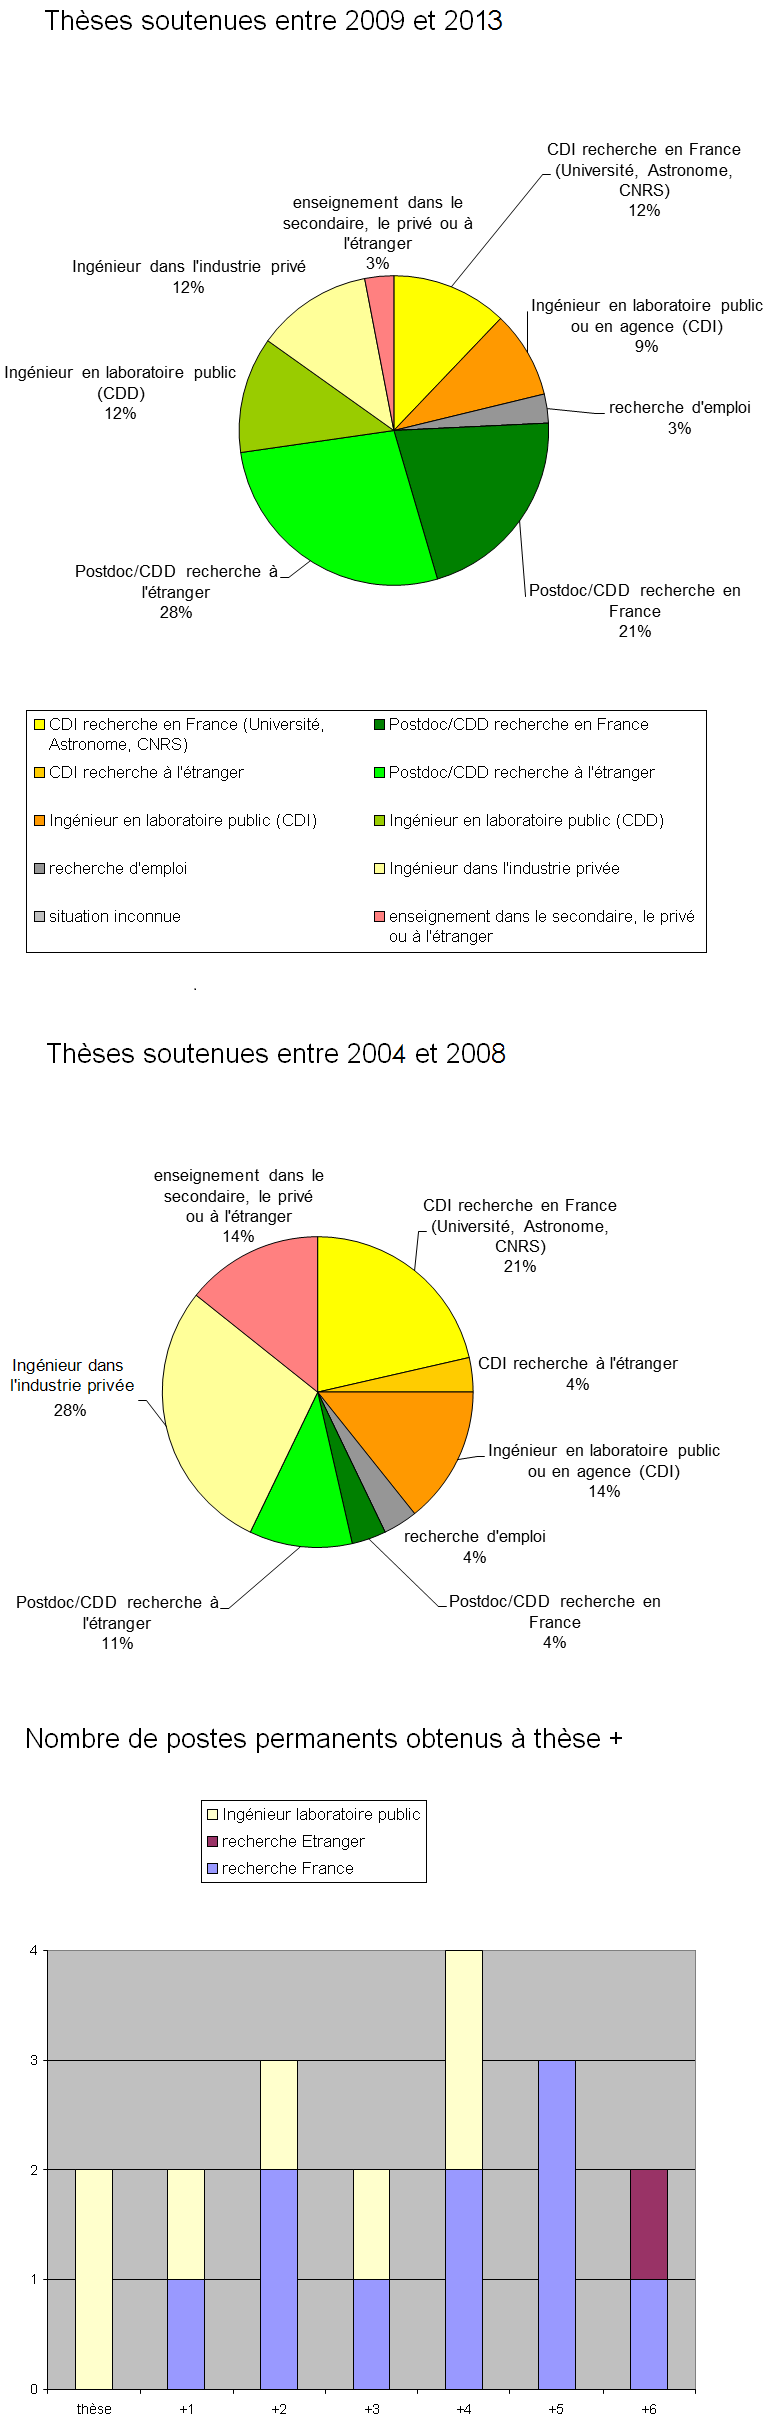 statistiques_thesards_17mai14.PNG